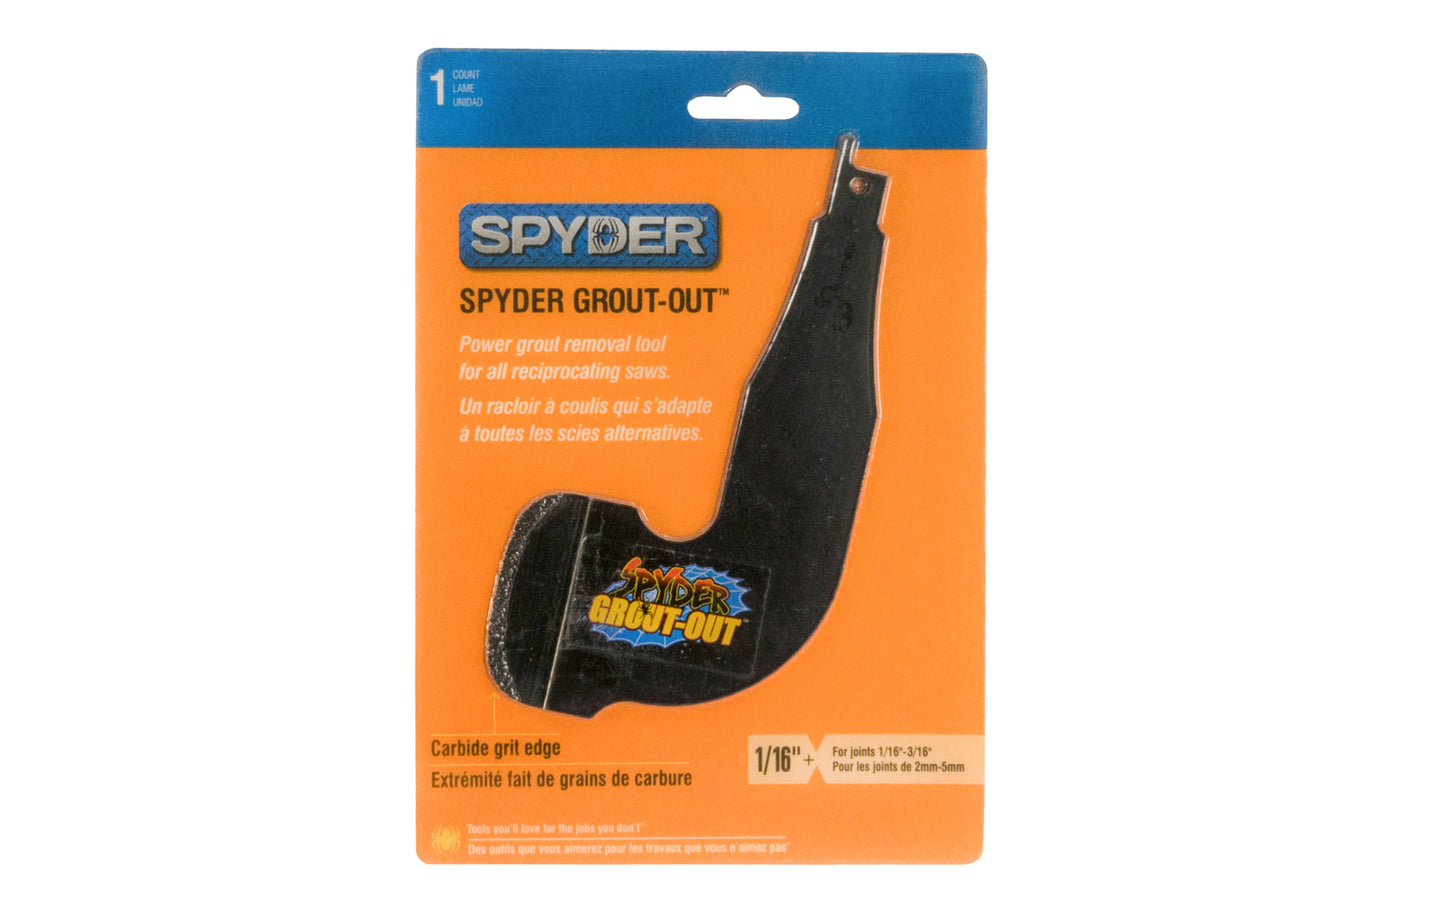 This Spyder "Grout Out" blade is a power grout removal tool for reciprocating saws. Carbide grit edge, 1/16" Thick. Designed for 1/16" to 3/16" joints. 884835000561